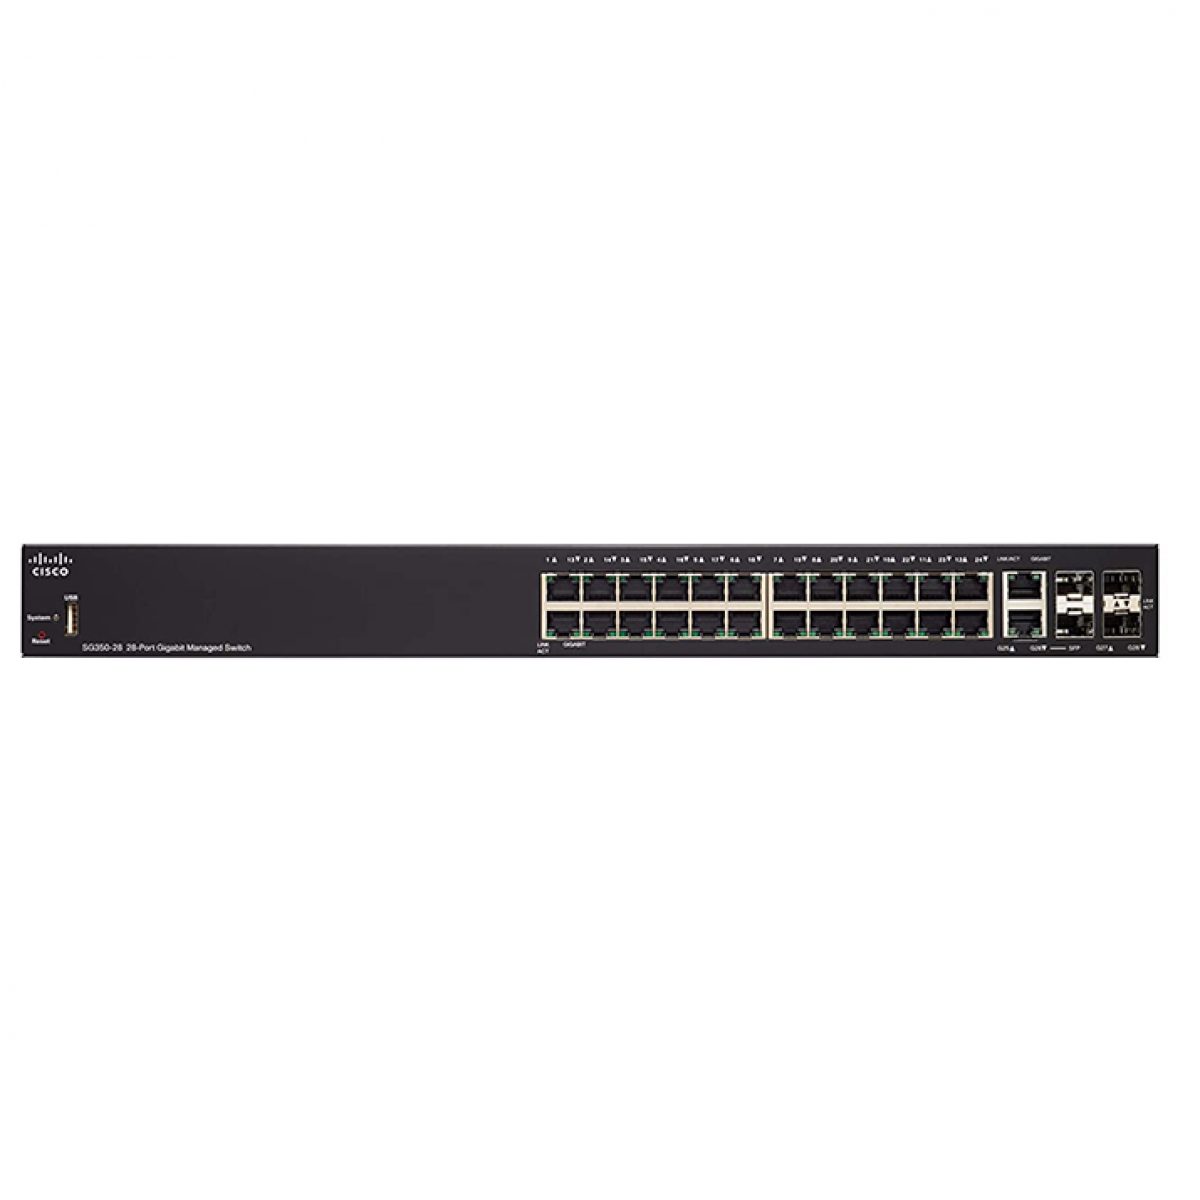 Cisco SG350 Gigaethernet SFP and Layer 3 Managed Switch 